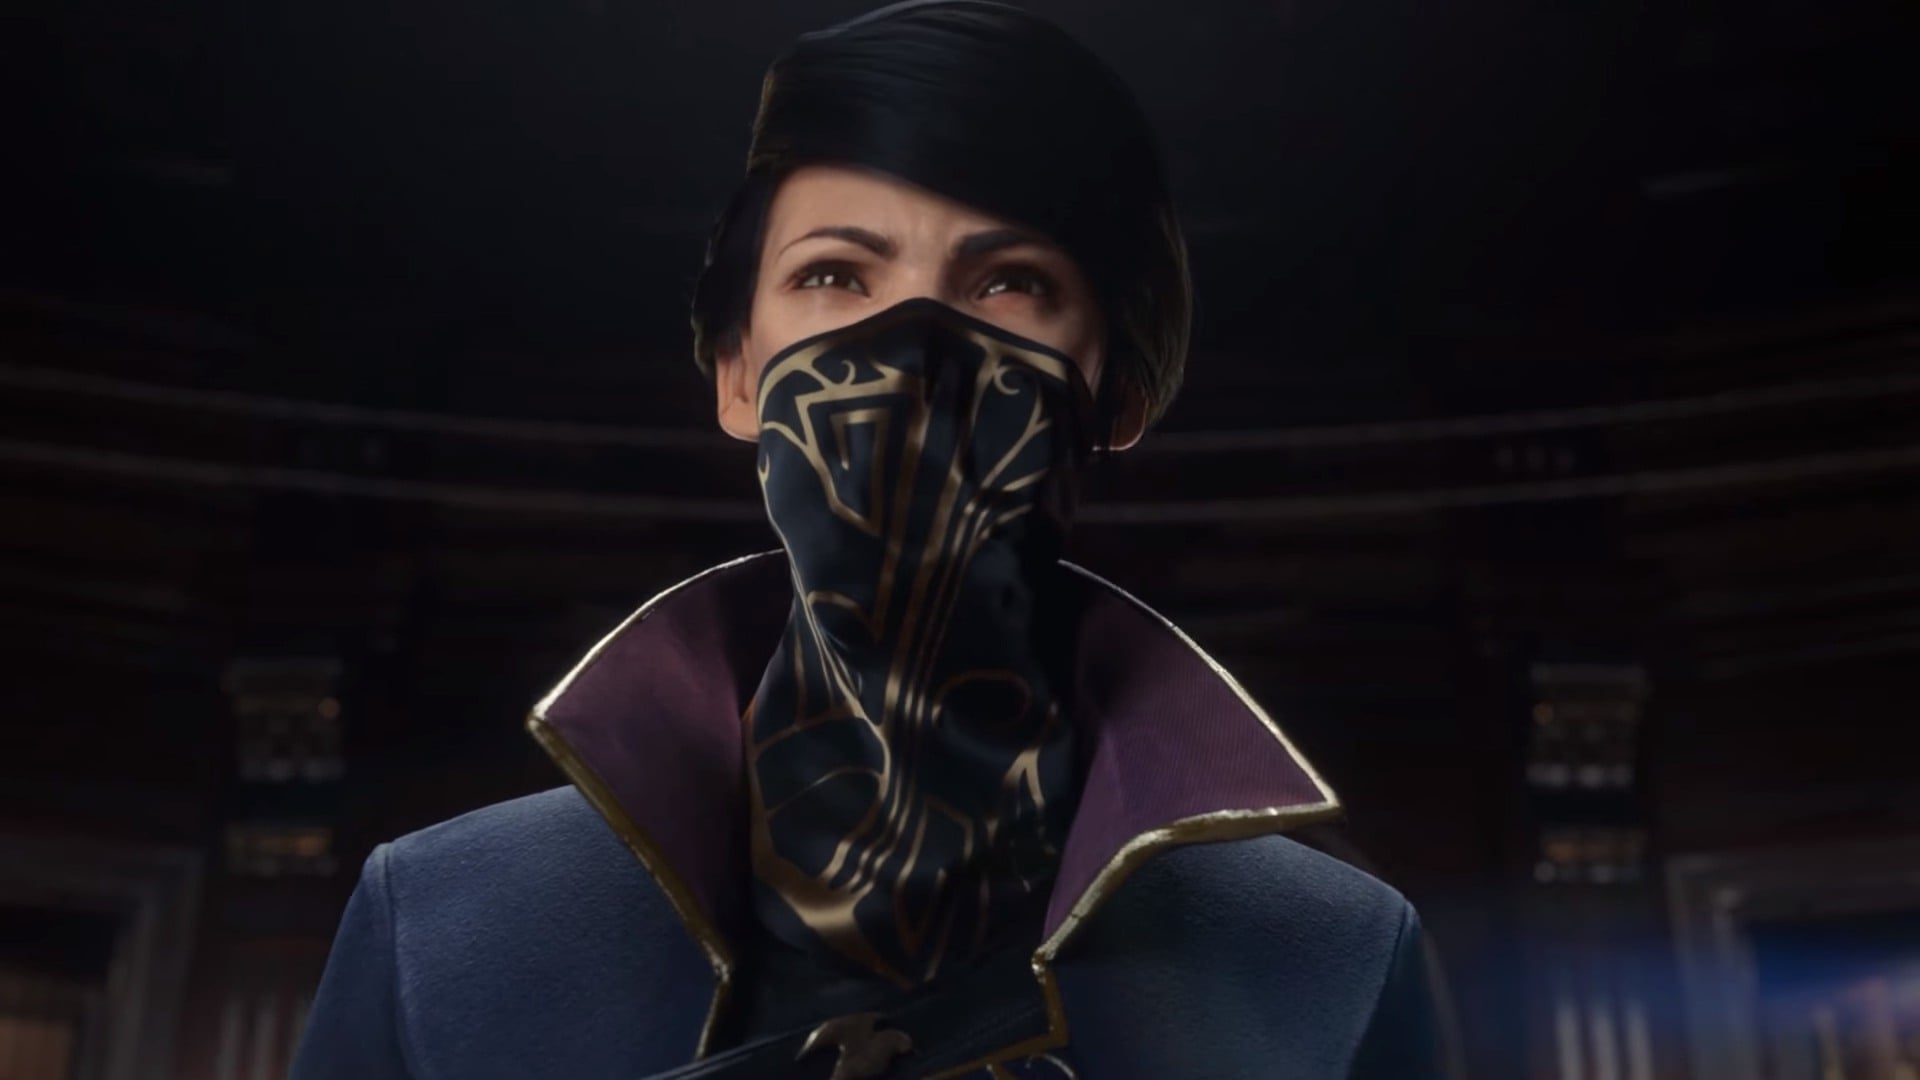 Amazing Dishonored 2 Pictures & Backgrounds